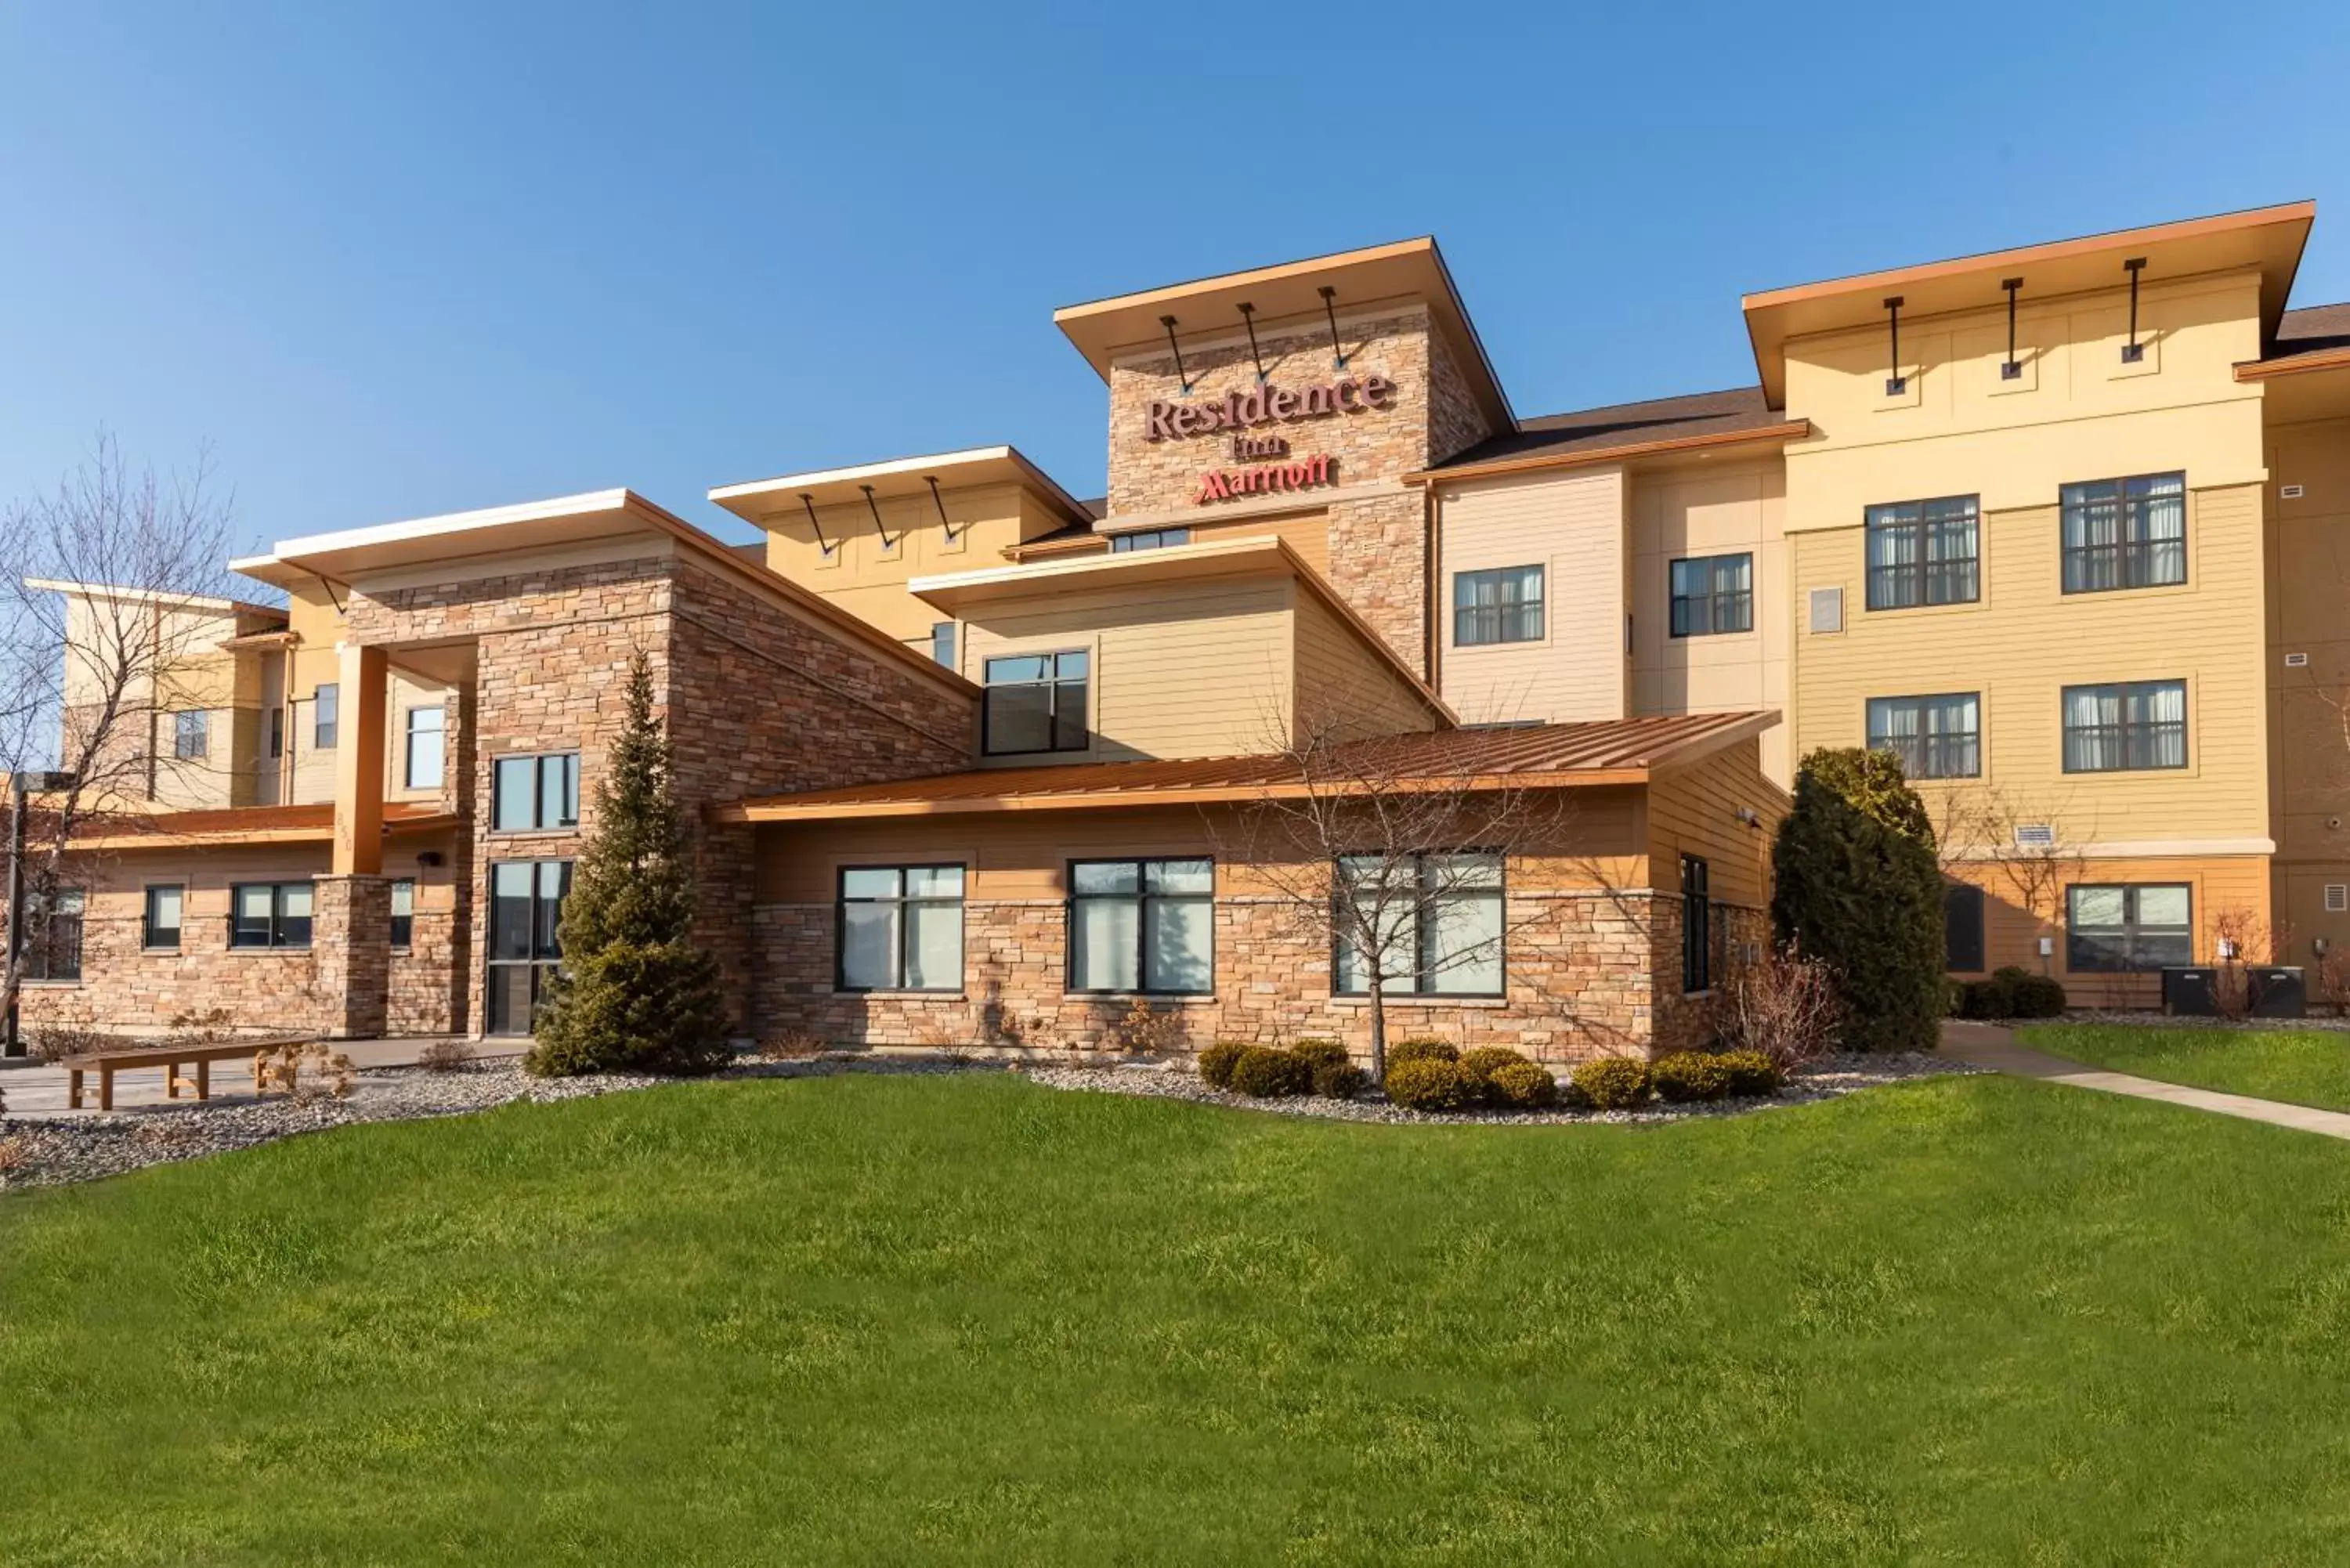 Property Building in Residence Inn by Marriott Midland